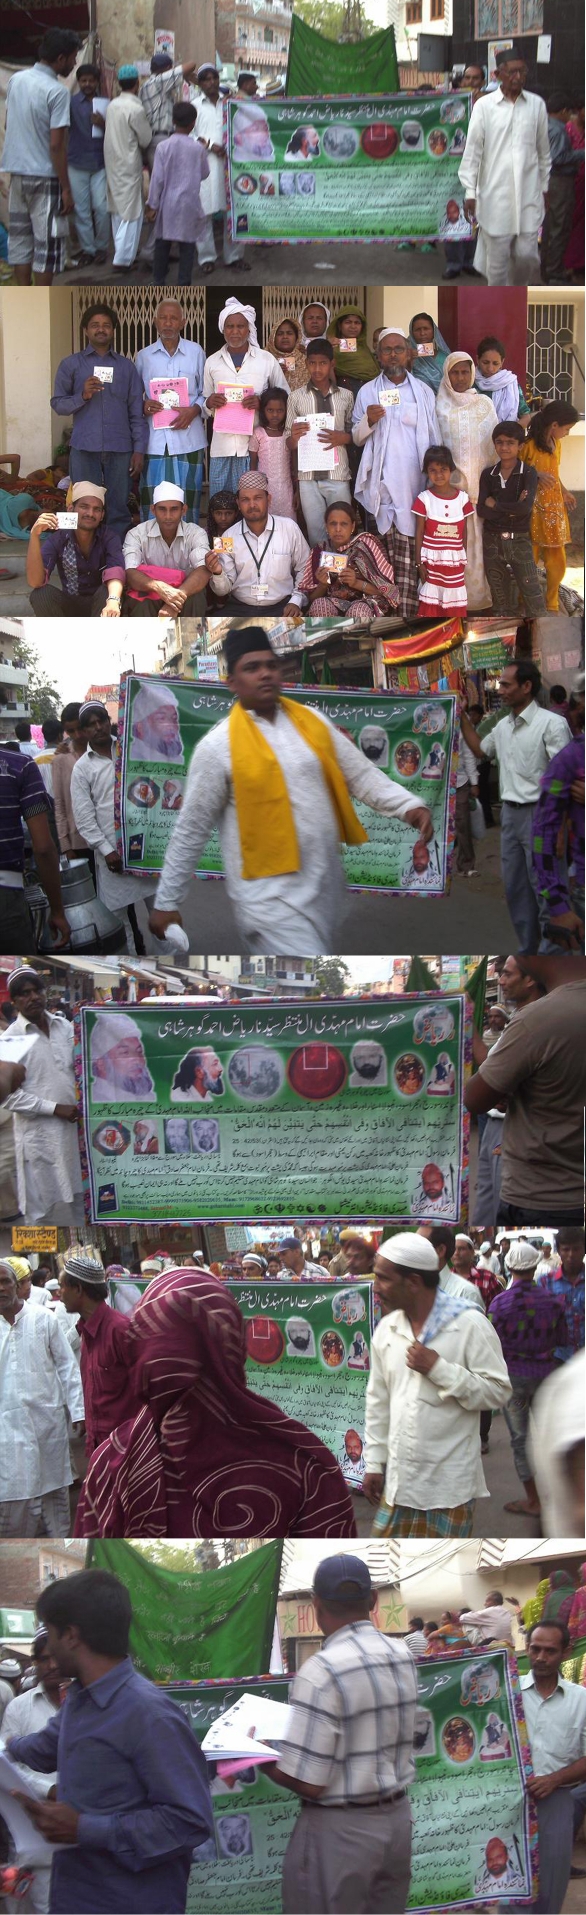 MFI Members in Ajmer carry out a rally to promote and propagate the divine images of HDE RaRiaz Gohar Shahi